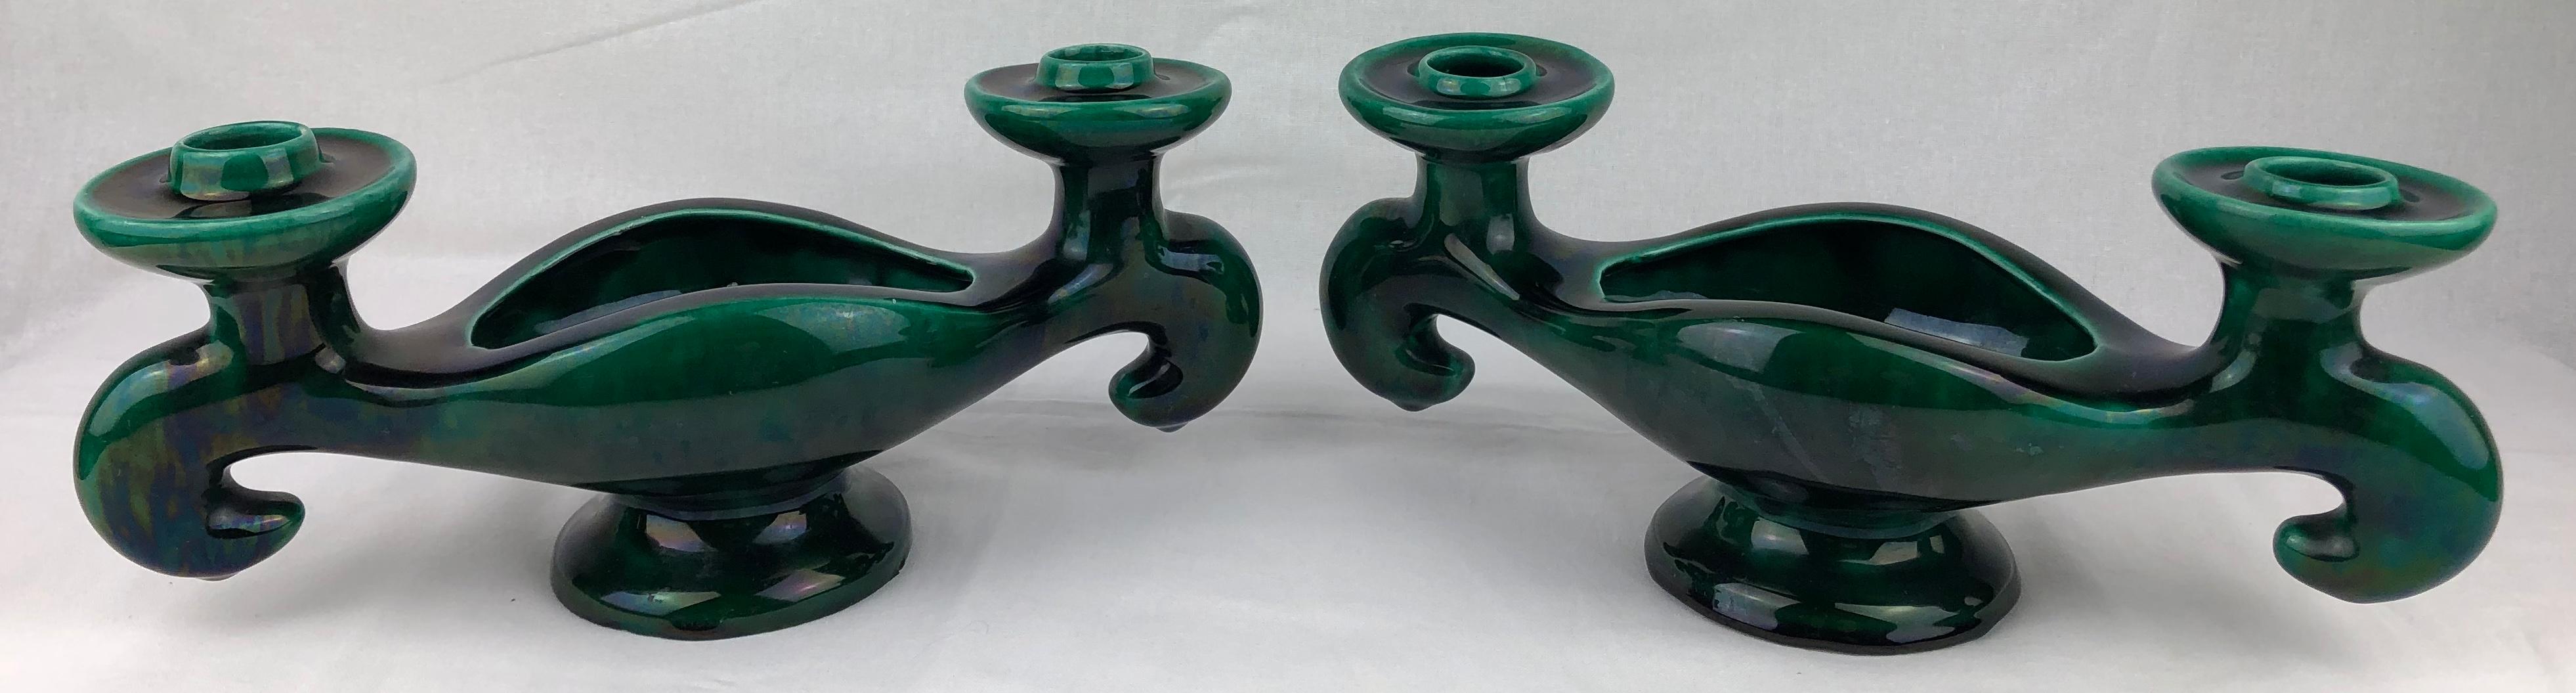 Glazed Vallauris Pair of French Midcentury Ceramic Candleholders For Sale